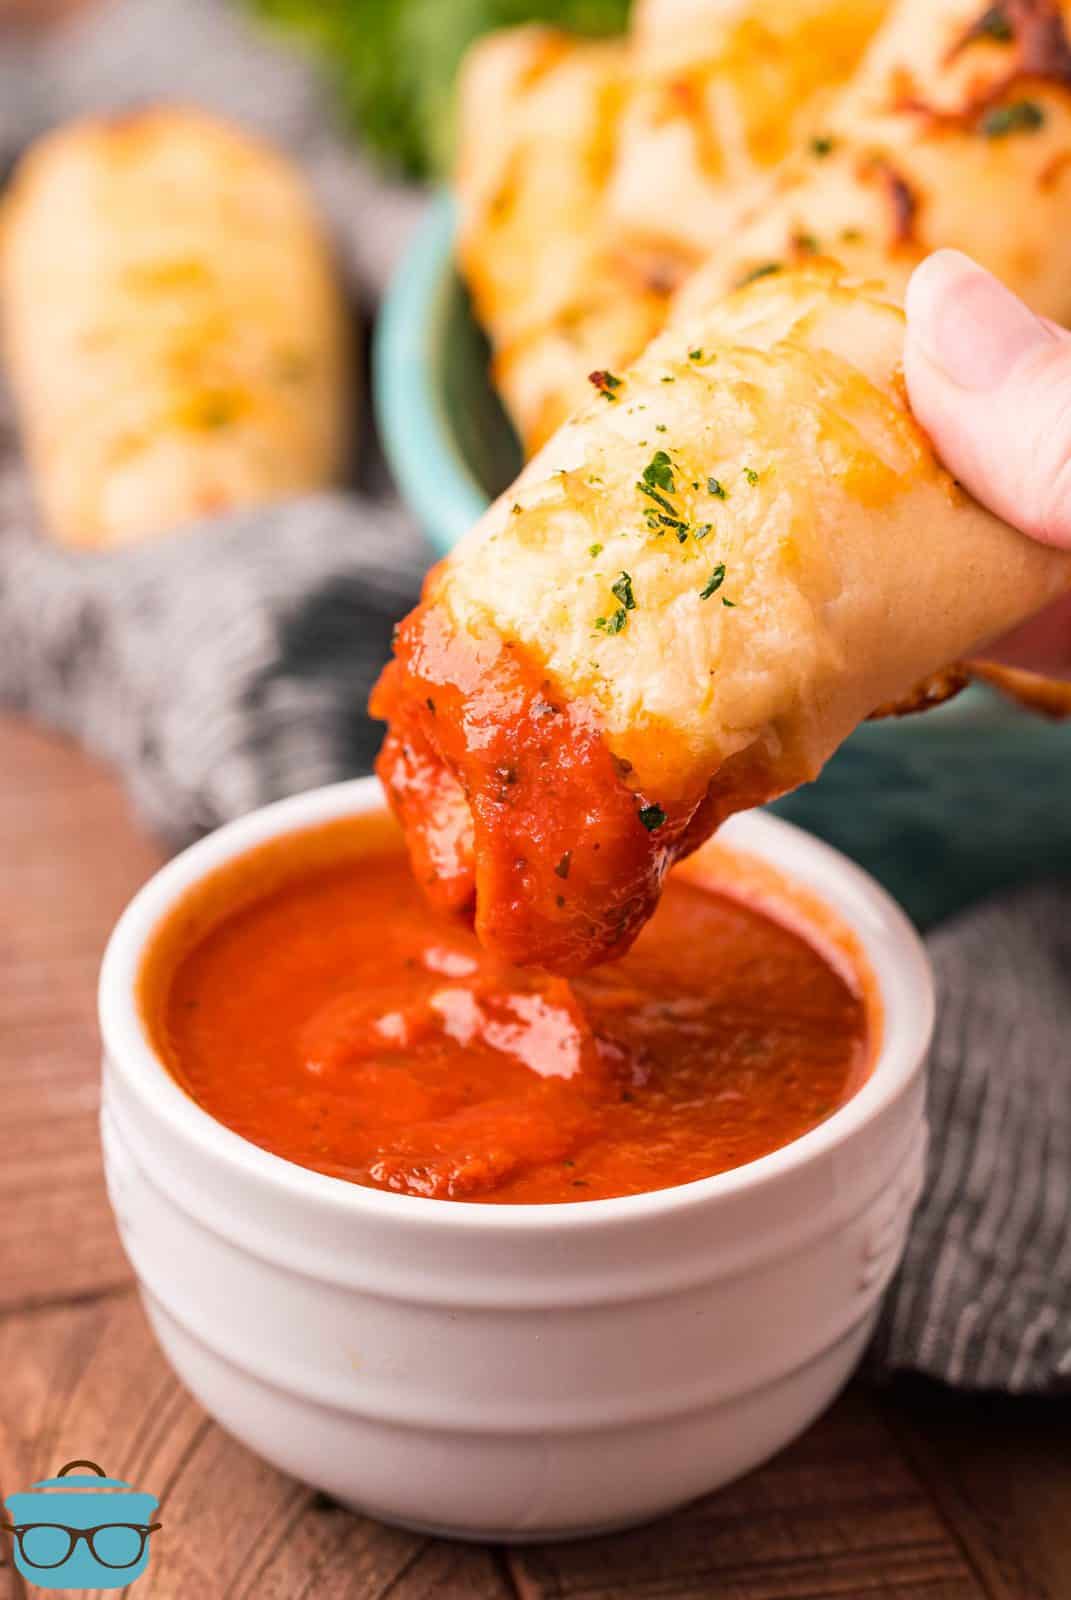 Hand dipping one Cheese Stuffed Breadstick in dipping sauce.